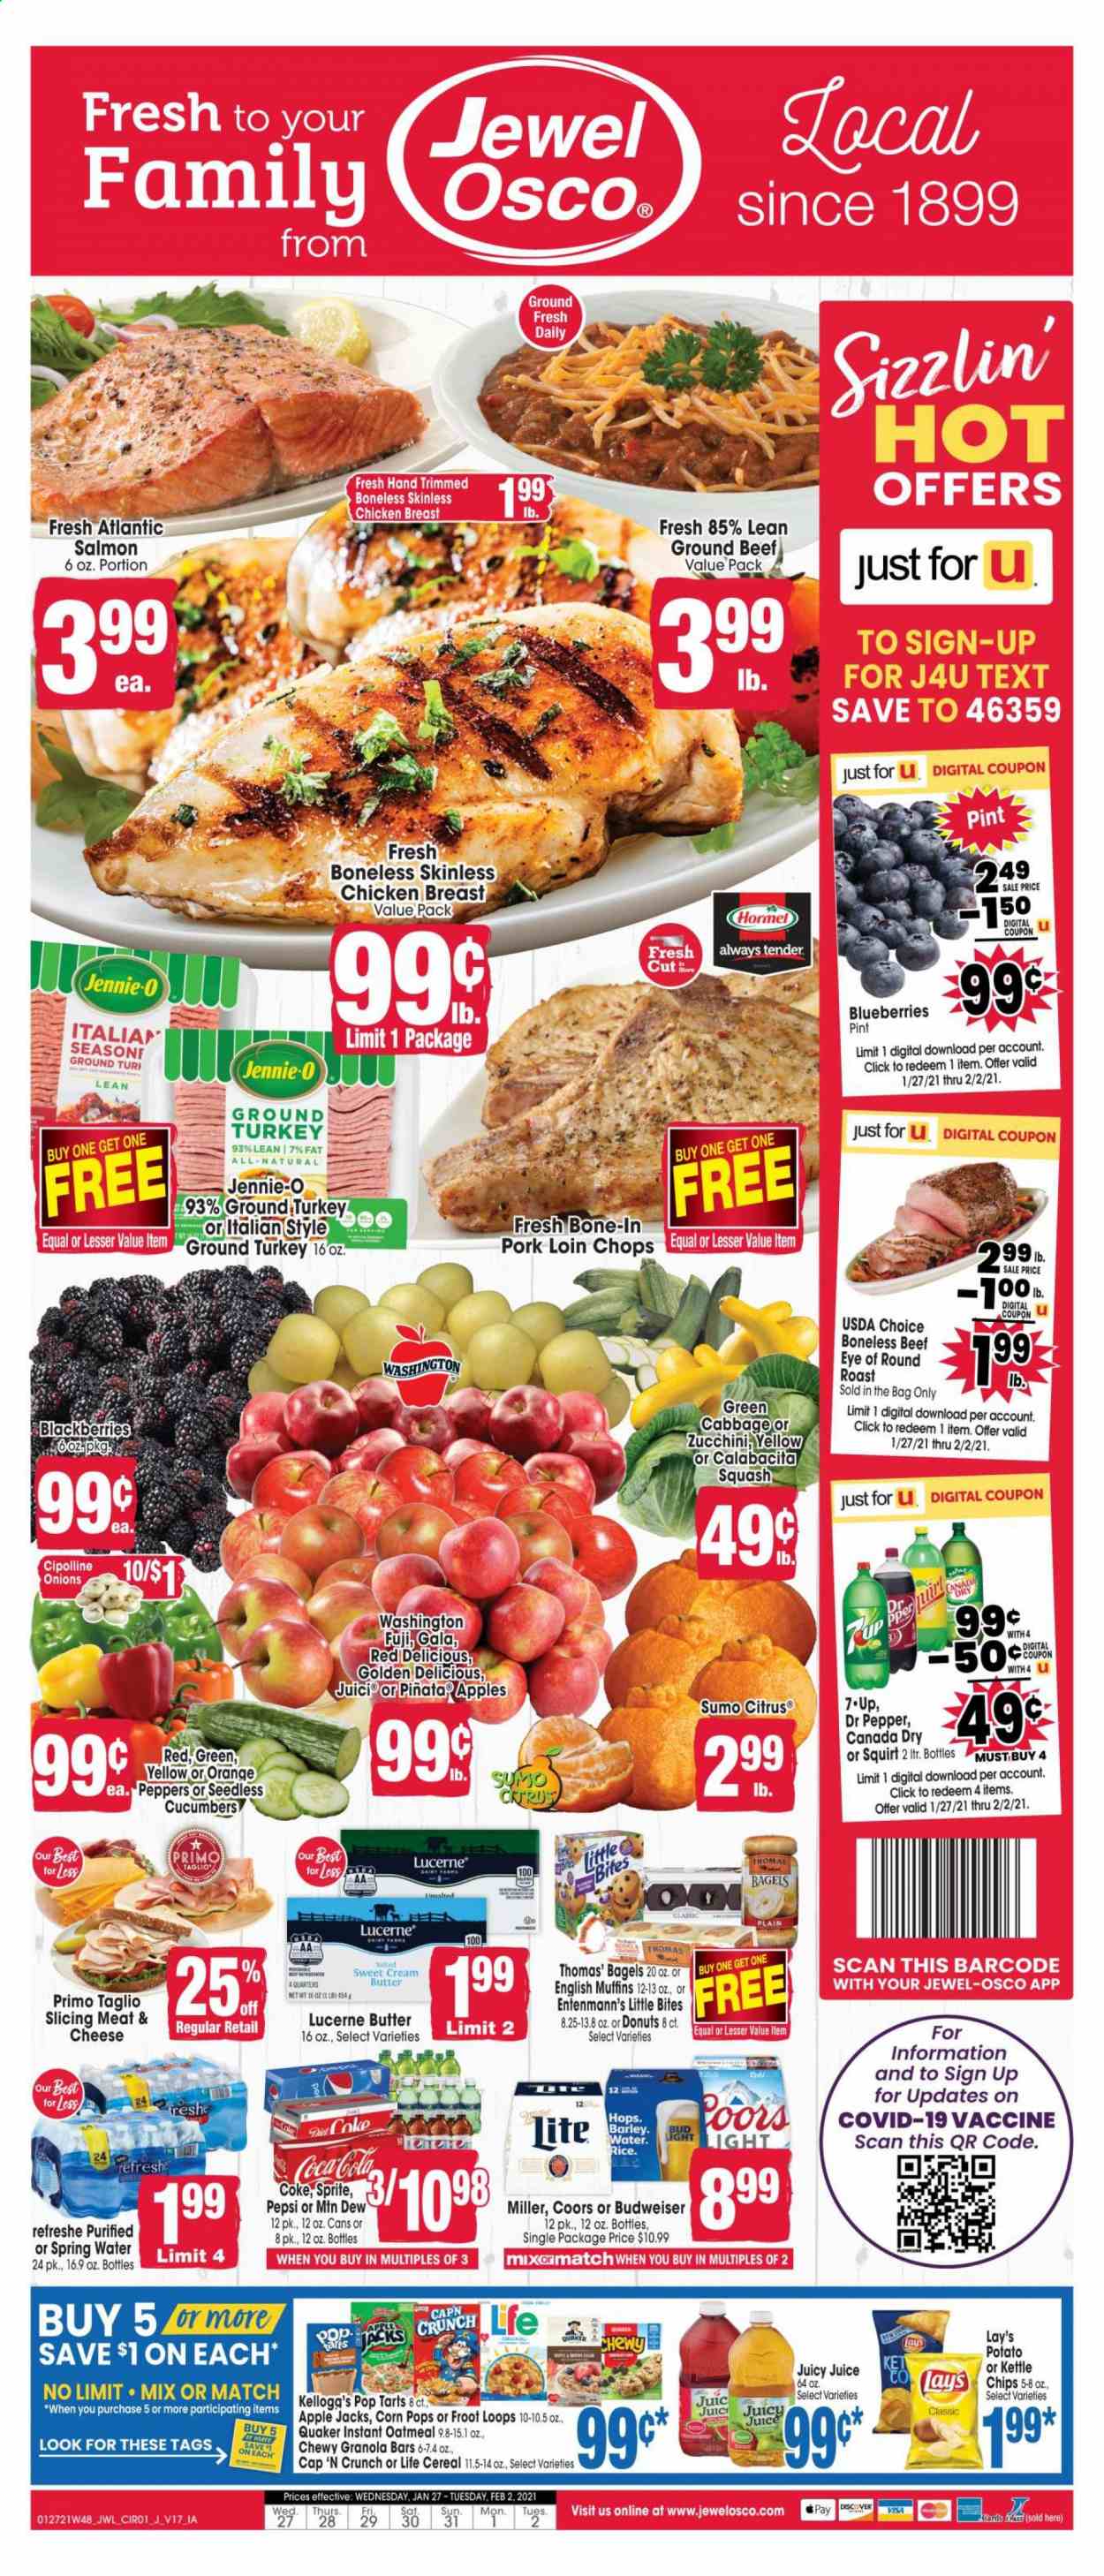 thumbnail - Jewel Osco Flyer - 01/27/2021 - 02/02/2021 - Sales products - Budweiser, Coors, zucchini, blackberries, blueberries, Golden Delicious, bagels, donut, muffin, Entenmann's, Little Bites, apples, oranges, salmon, english muffins, Quaker, Hormel, butter, Pop-Tarts, chips, Lay’s, oatmeal, cucumber, cereals, granola bar, Corn Pops, Canada Dry, Coca-Cola, Mountain Dew, Sprite, Pepsi, juice, Dr. Pepper, 7UP, spring water, beer, Miller, ground turkey, chicken breasts, beef meat, ground beef, eye of round, round roast, pork loin, pork meat. Page 1.